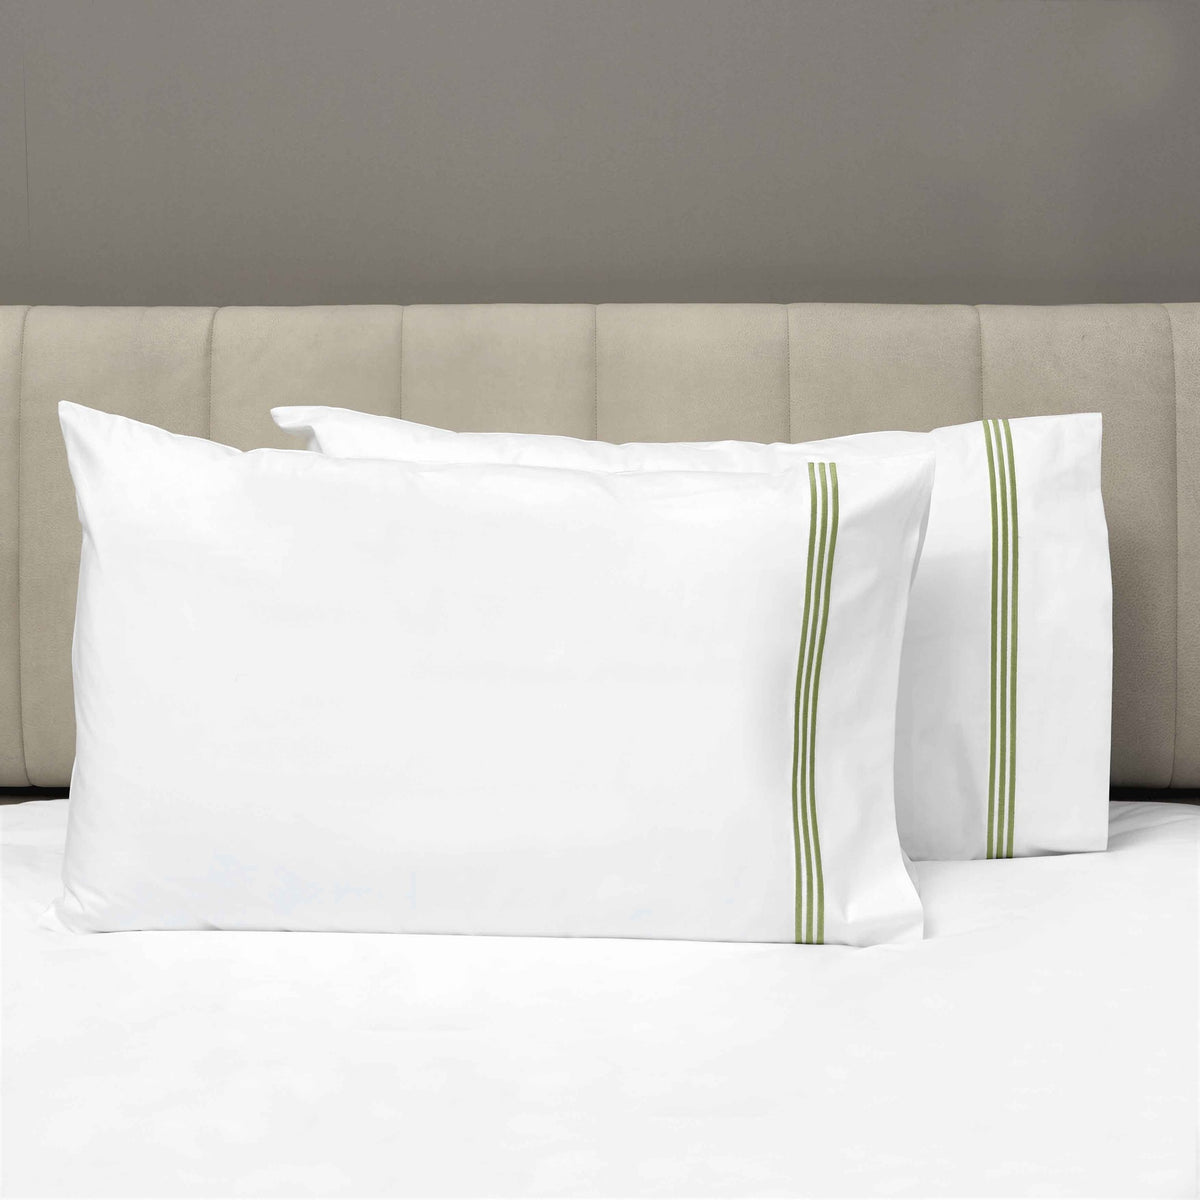 Pair of Pillowcases of Signoria Platinum Percale Bedding in White/Moss Green Color